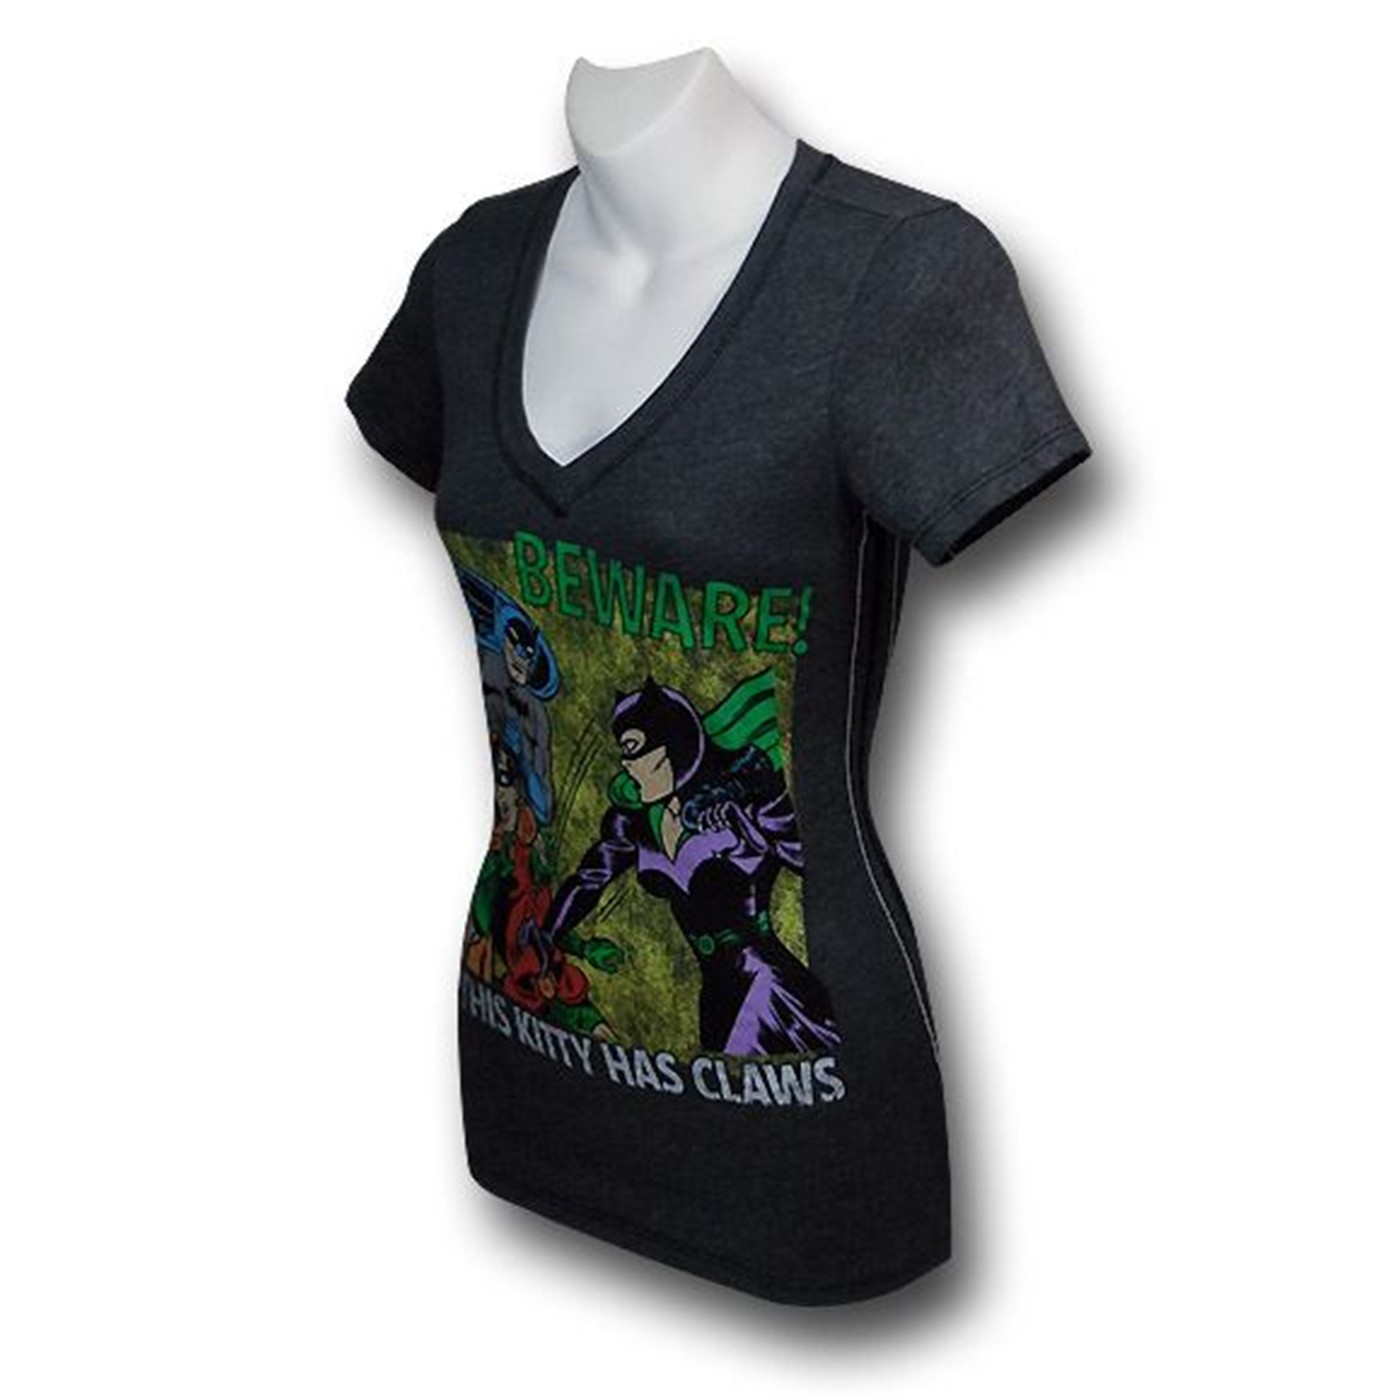 Catwoman Kitty Has Claws Juniors Trunk T-Shirt